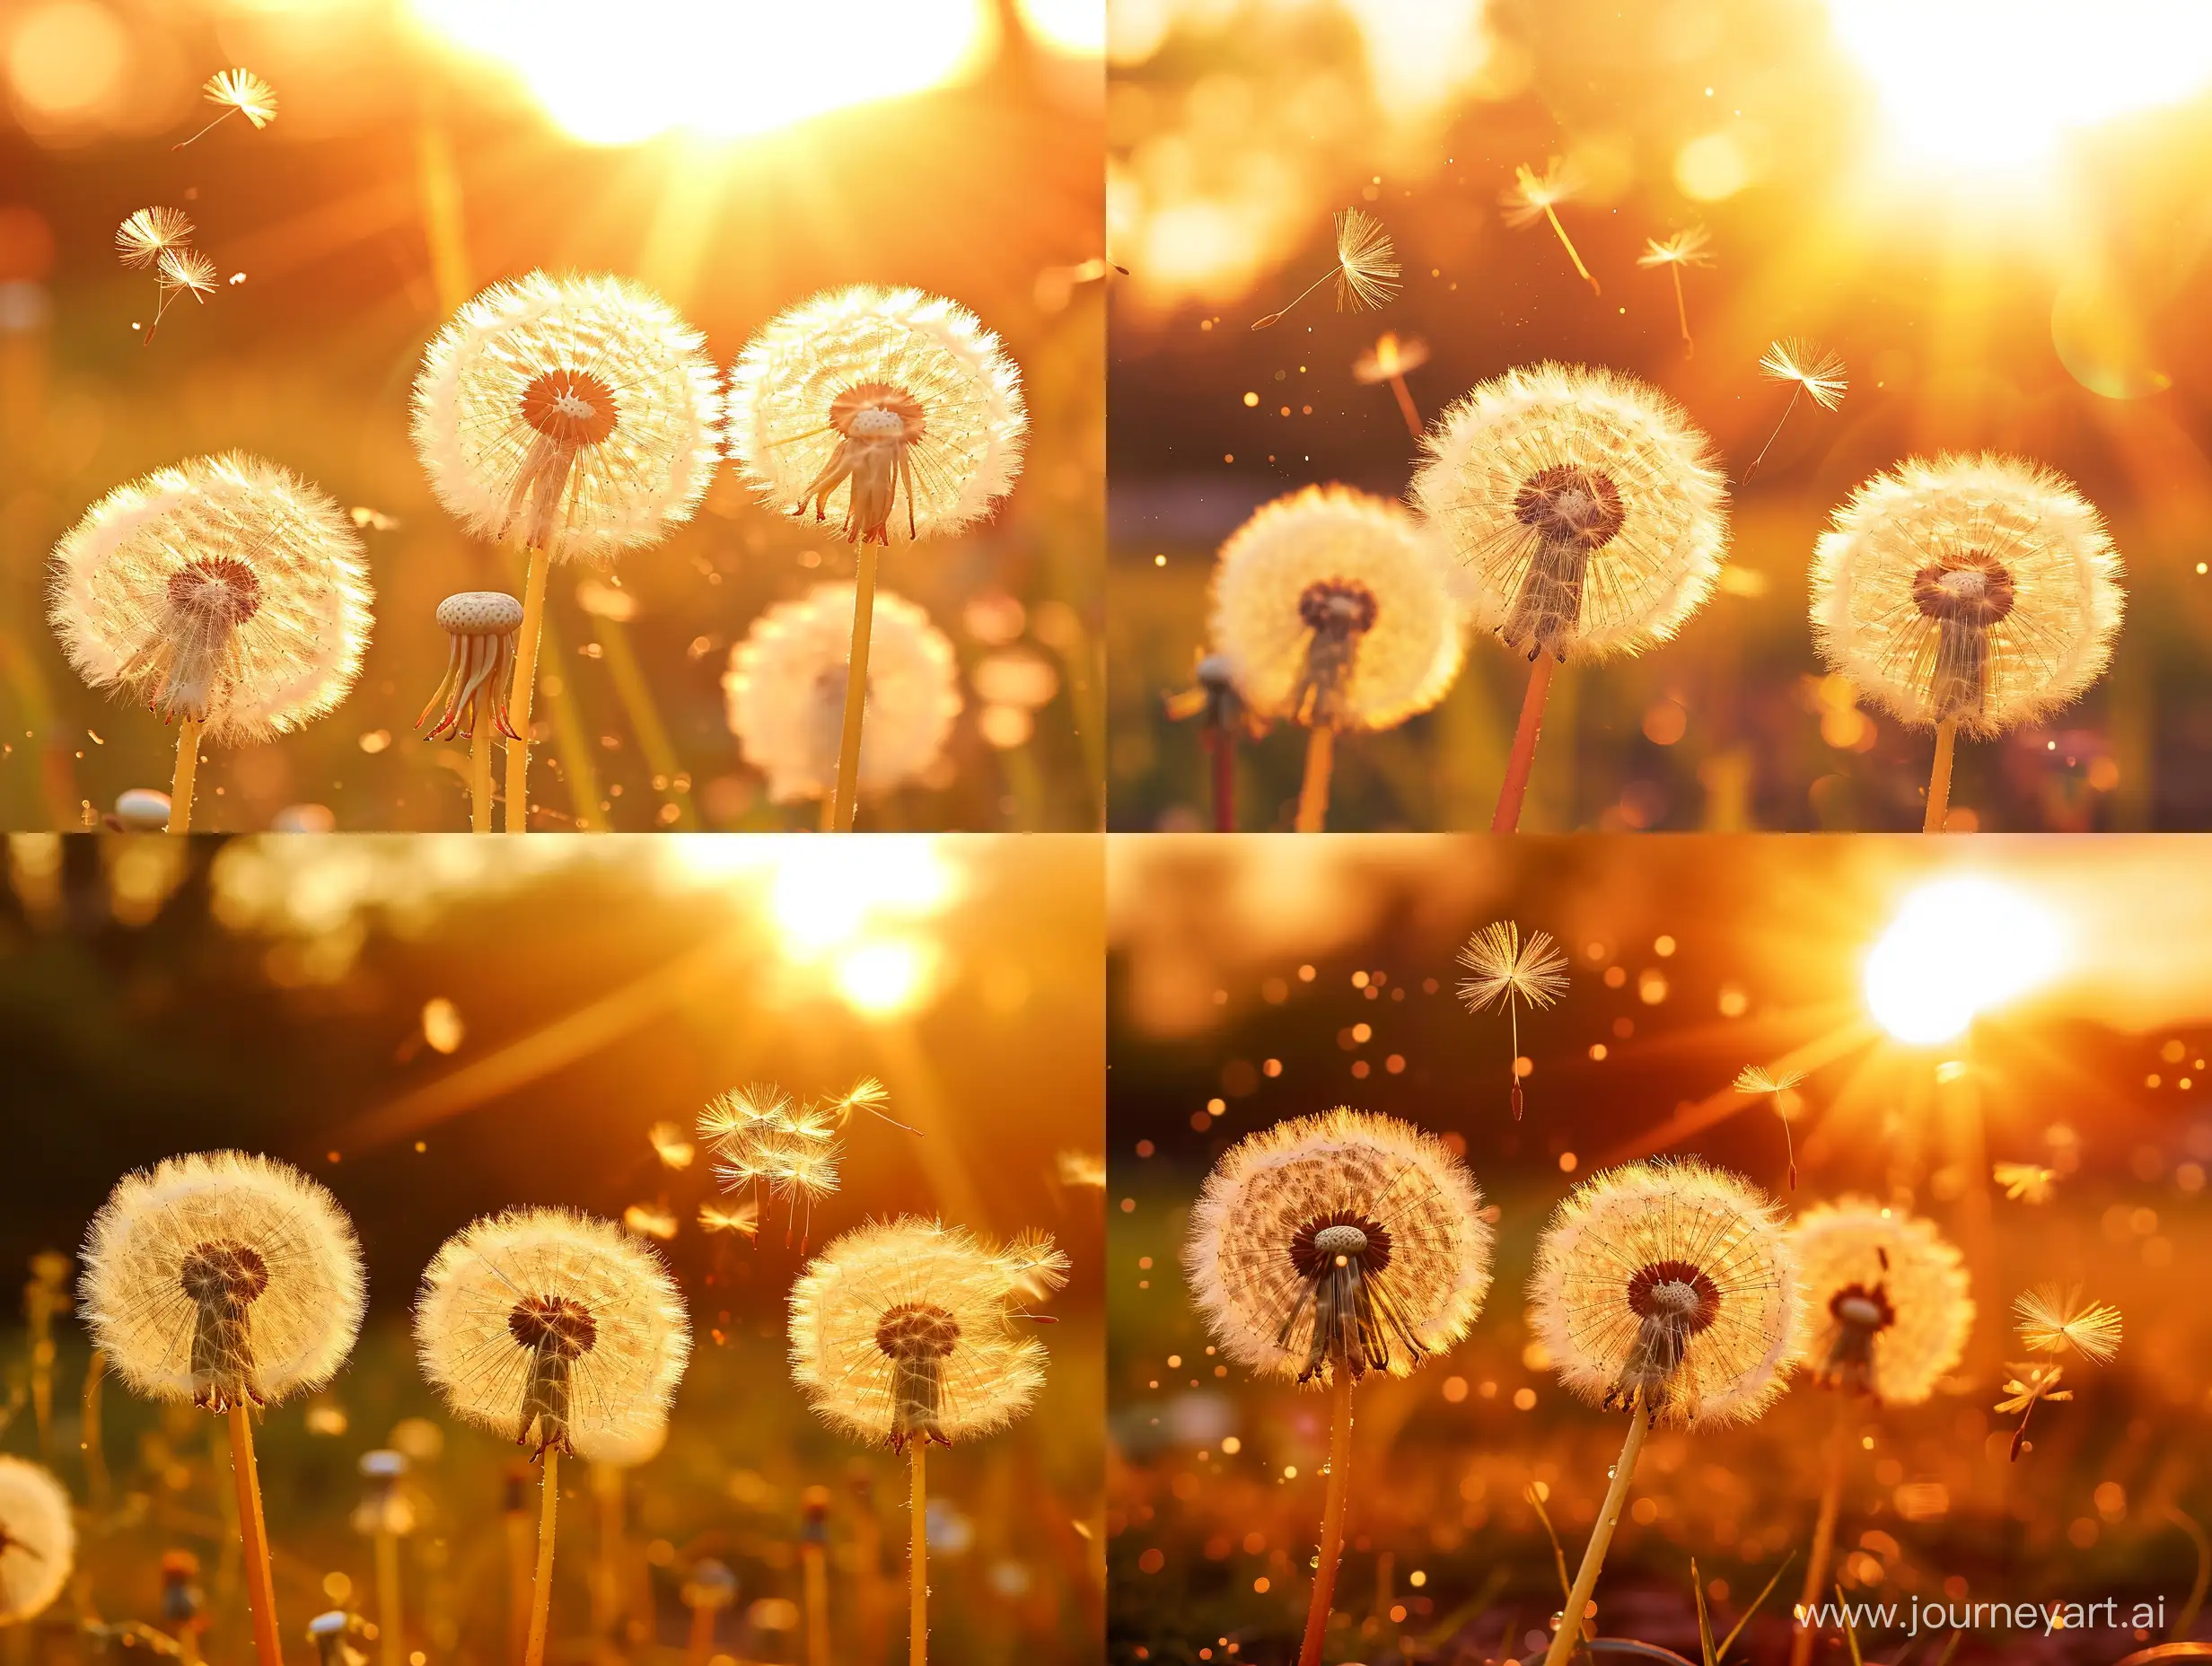 a few close up Dandelions in a field with golden hour sunlight and flying fluff